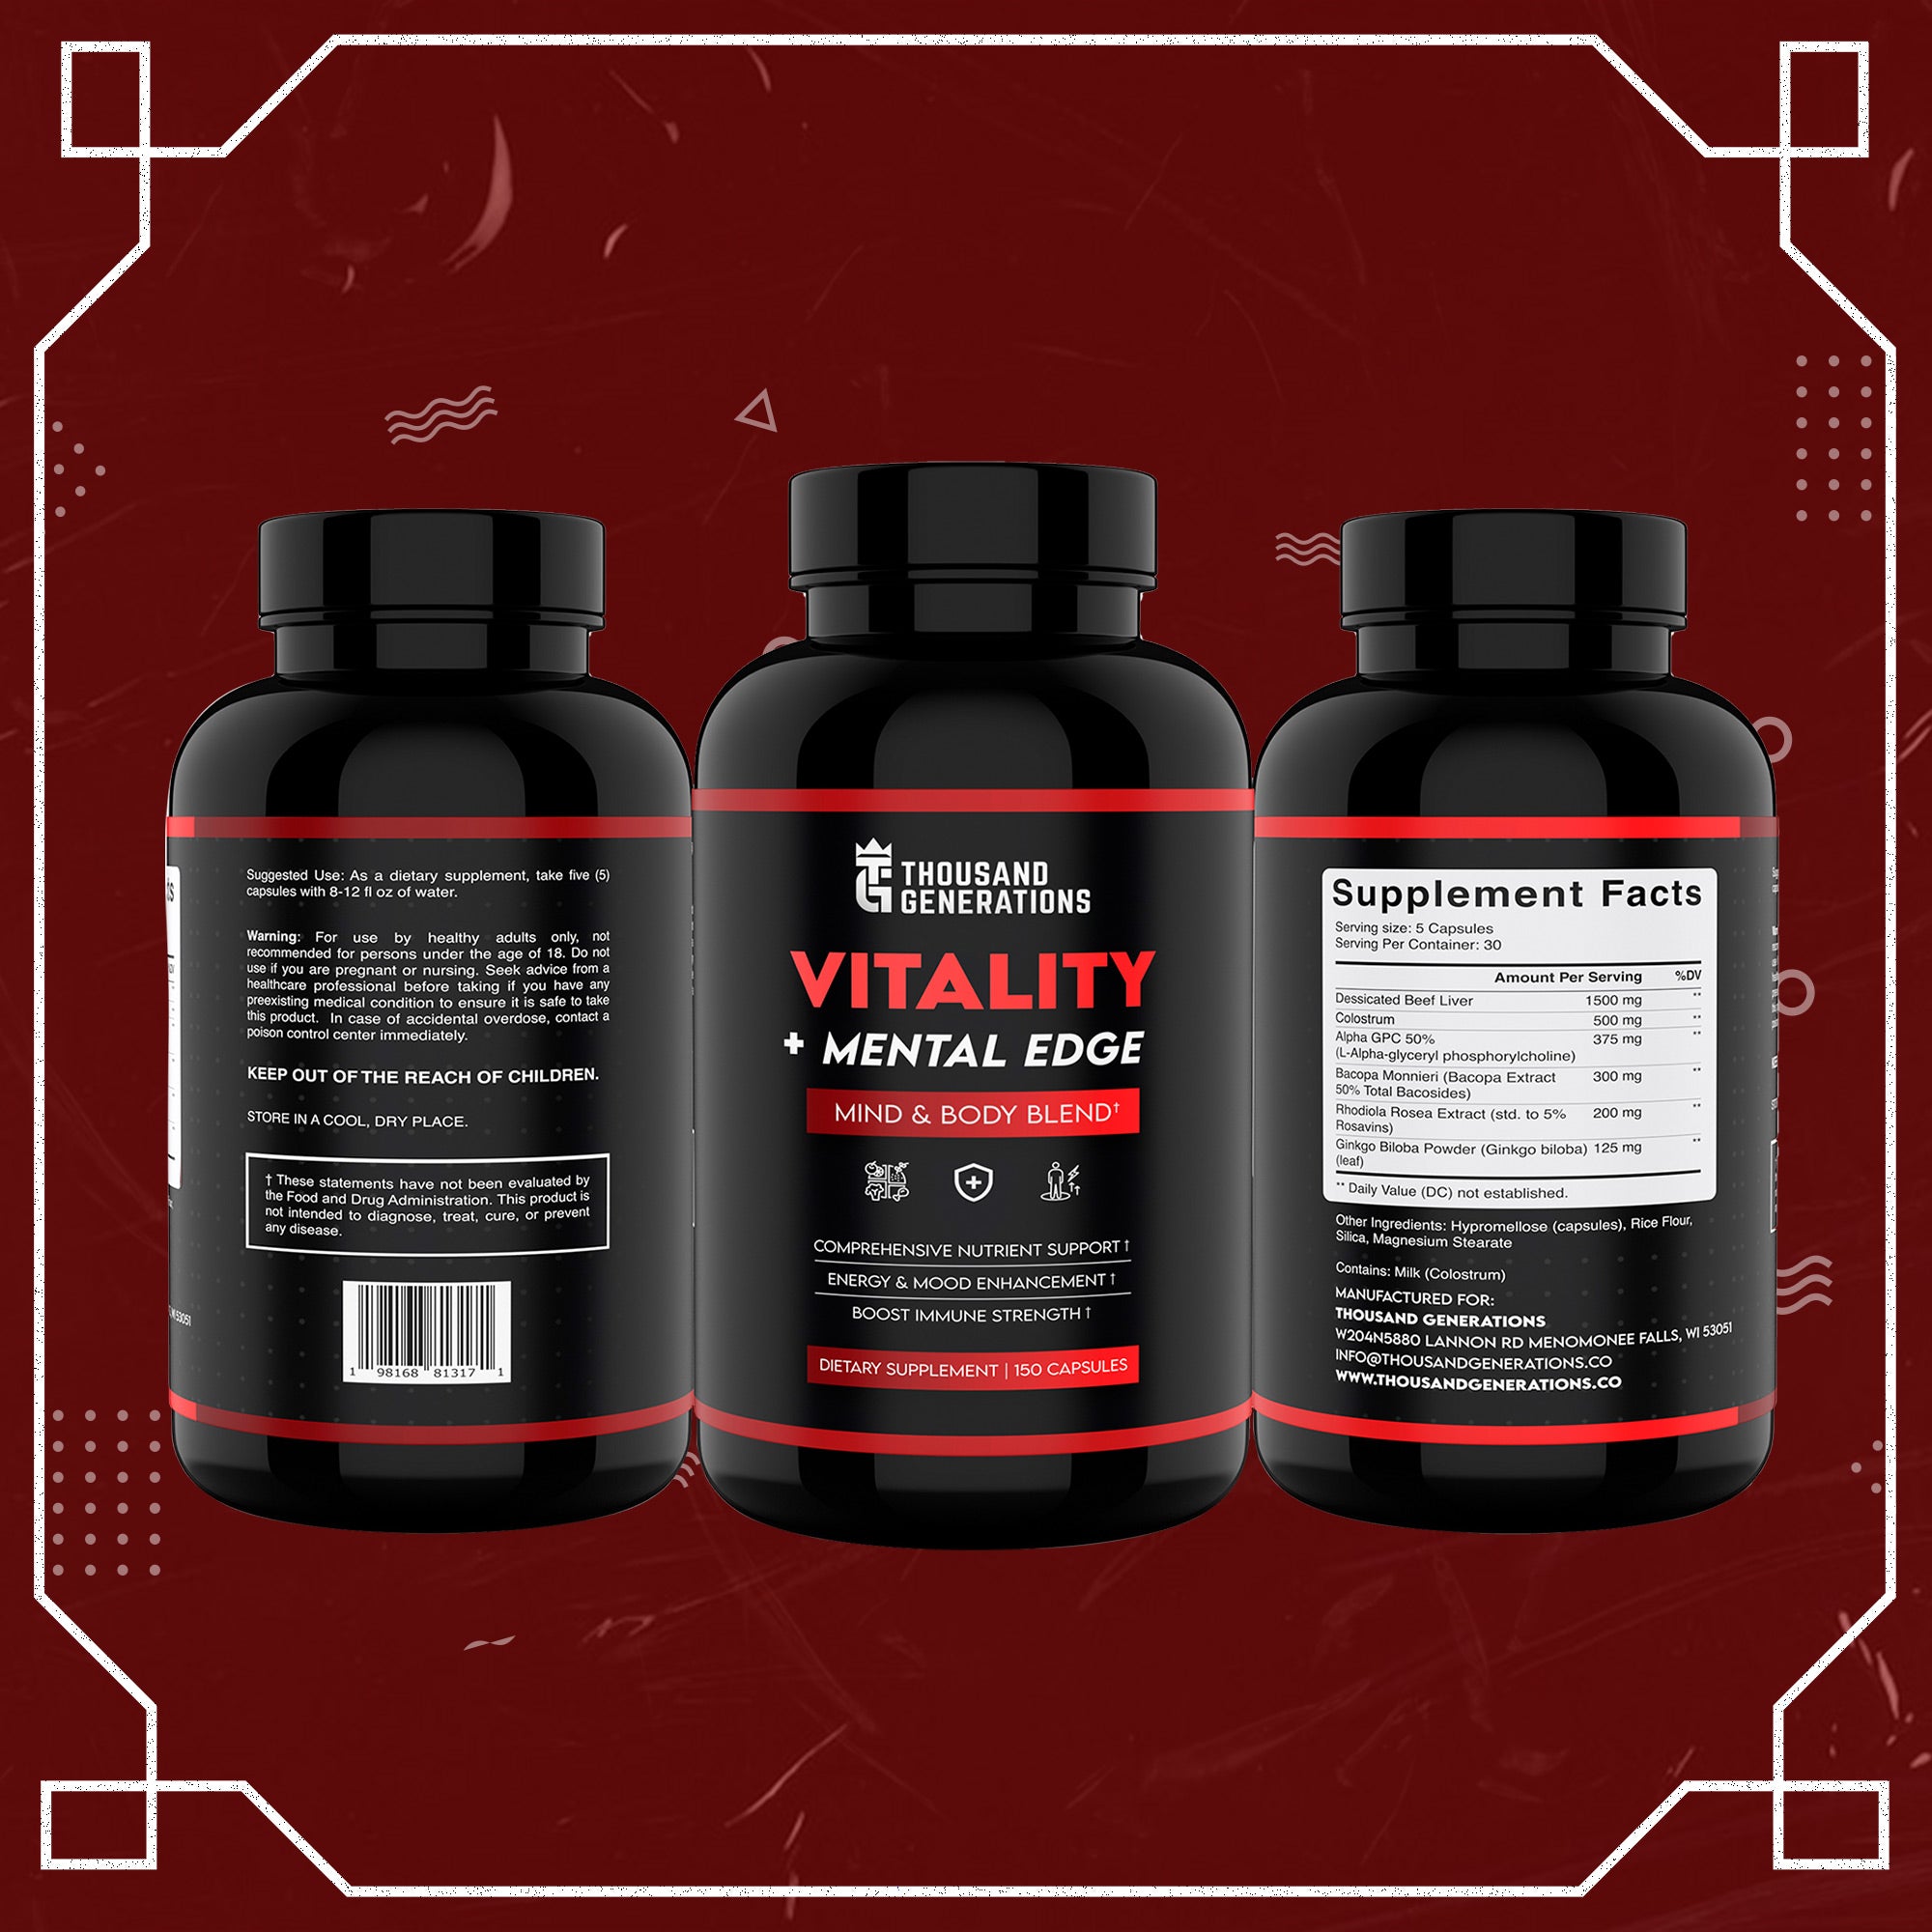 Elevate Your Day with Vitality + Mental Edge